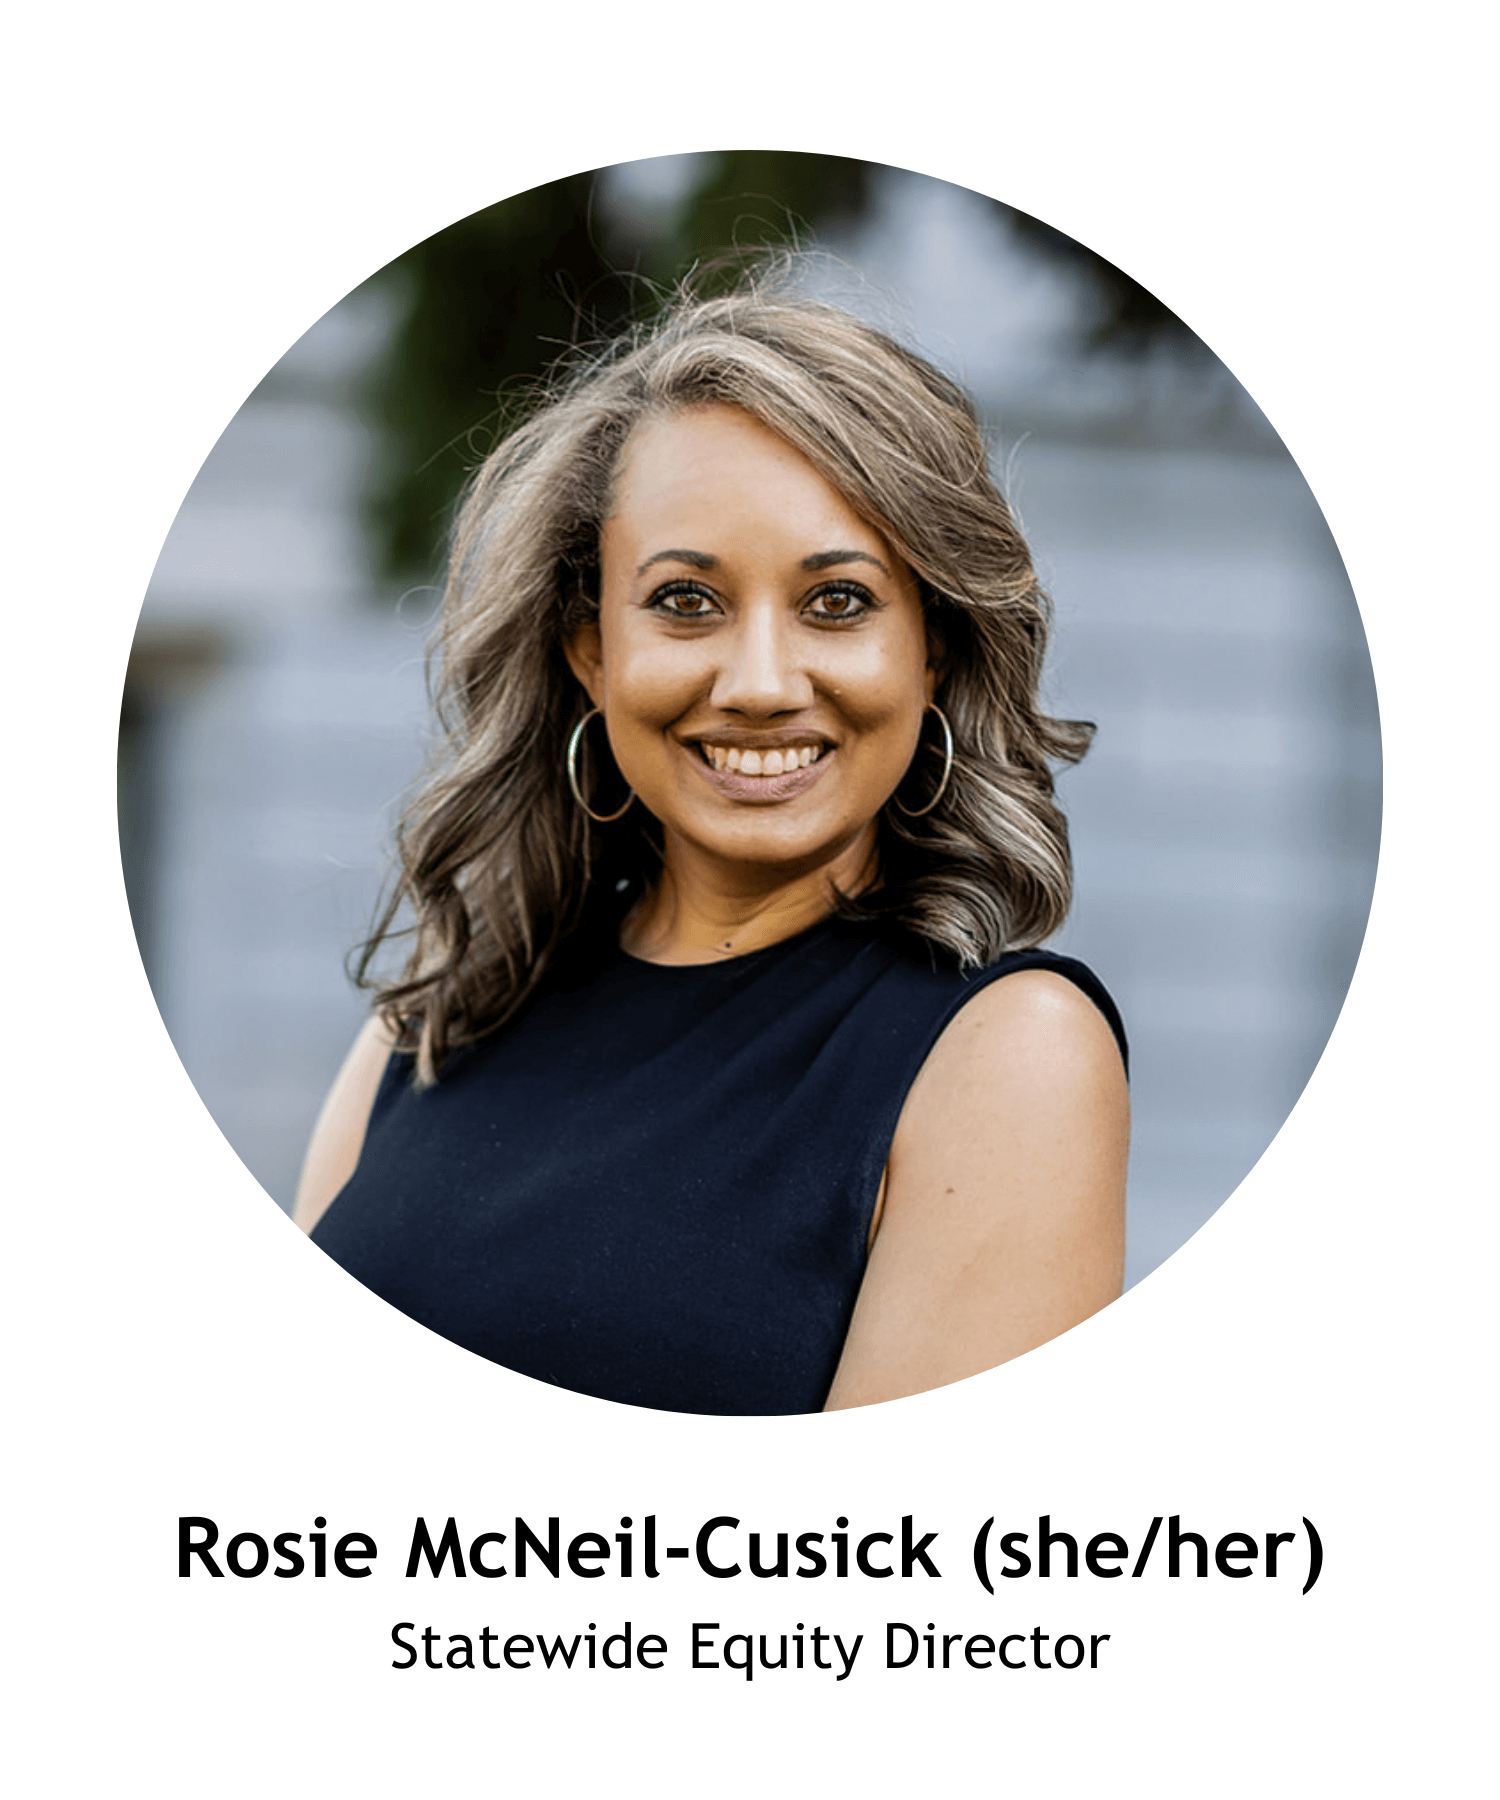 Rosie McNeil-Cusick (she/her), Statewide Equity Director